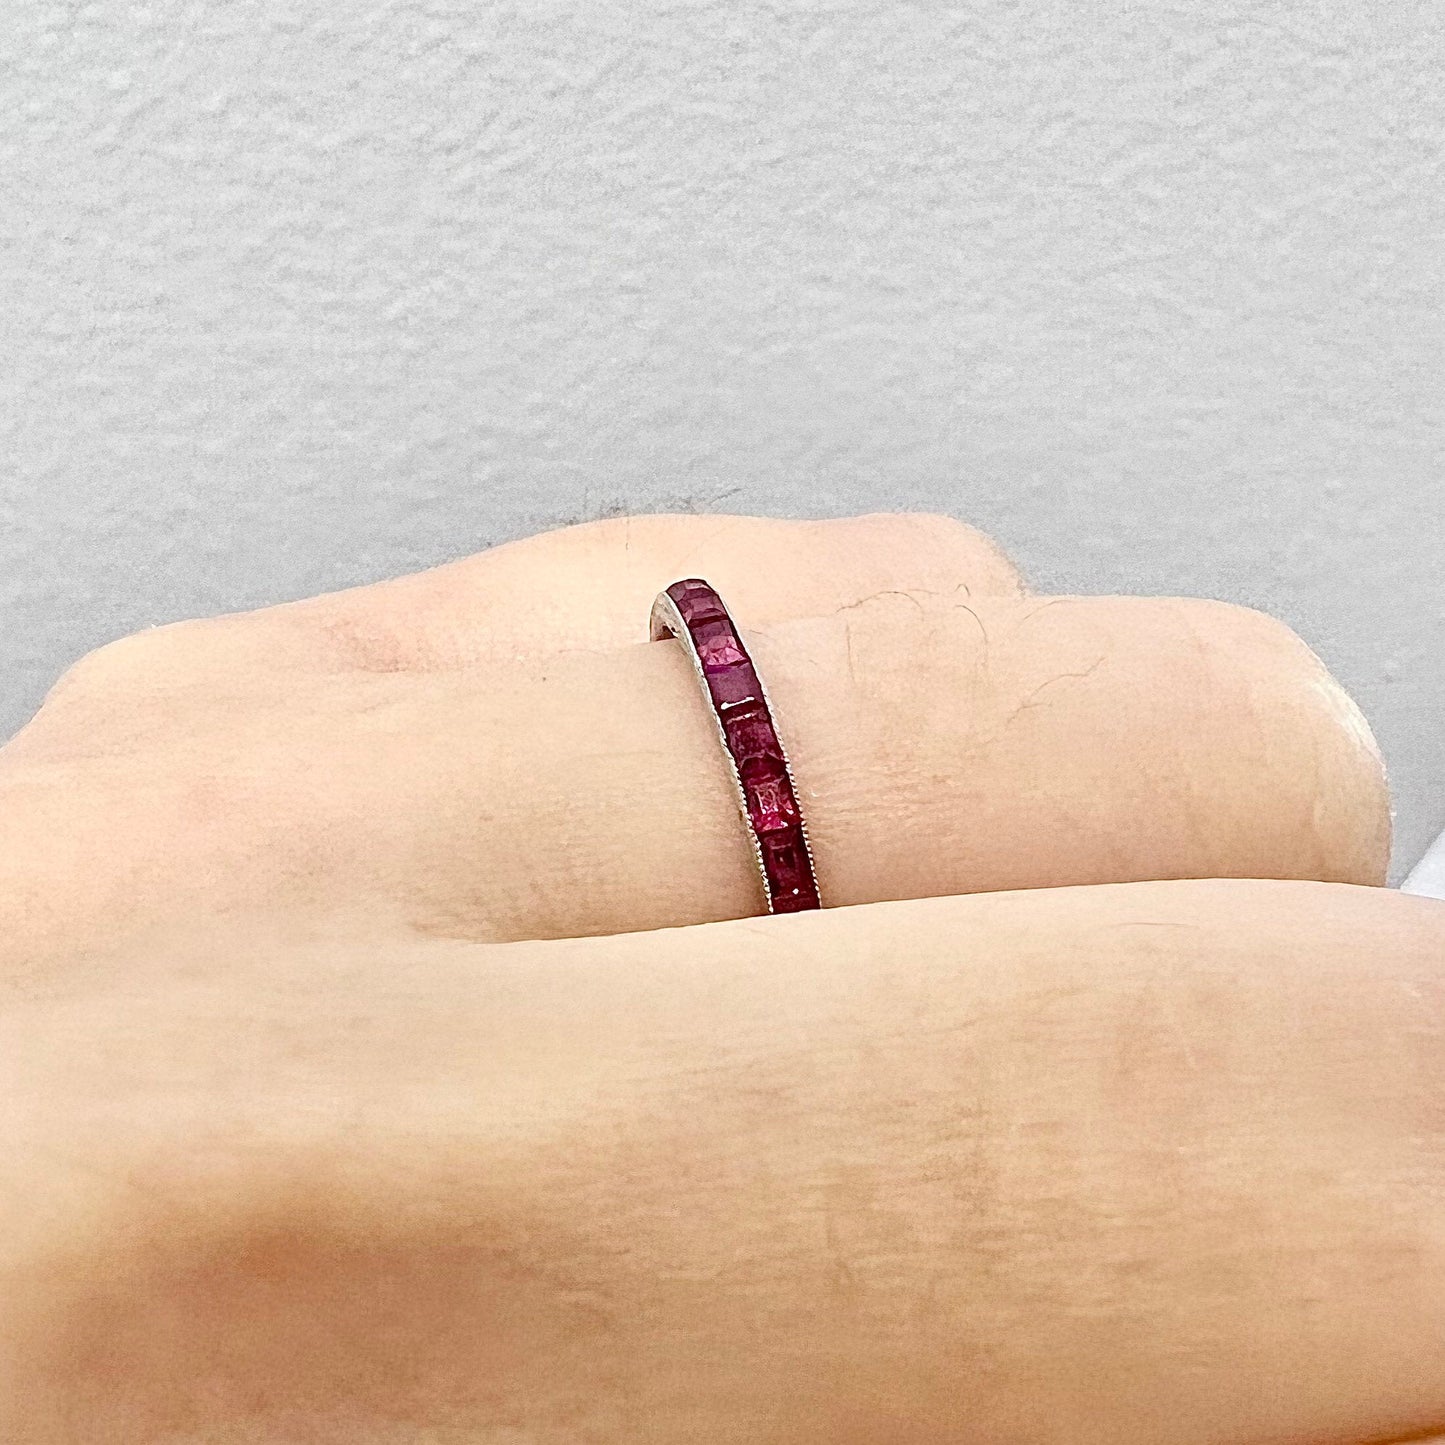 Rare Platinum Antique Art Deco Natural Ruby Band Ring - Birthday Gift For Her - July Birthstone - Anniversary Ring - Jewelry Sale